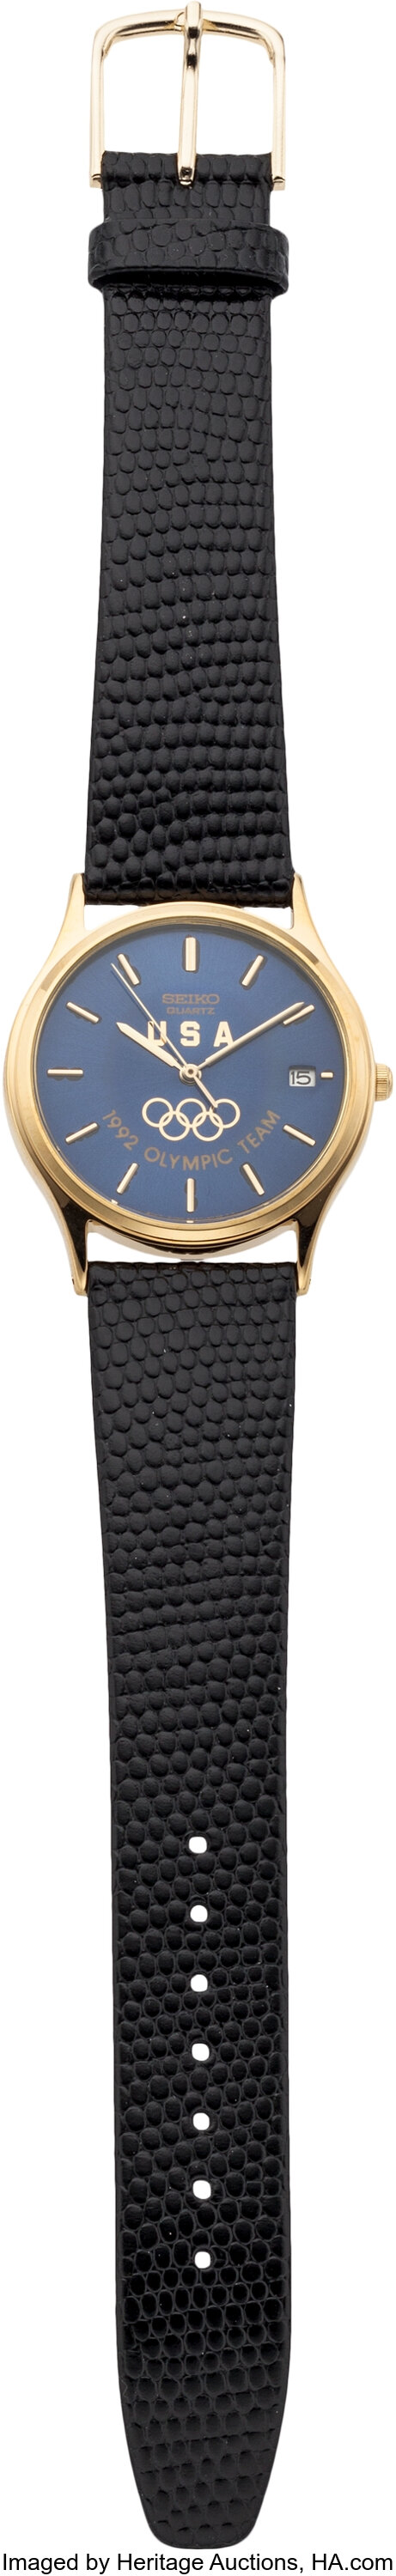 1992 Summer Olympic Games Wrist Watch Presented to American | Lot #82346 |  Heritage Auctions